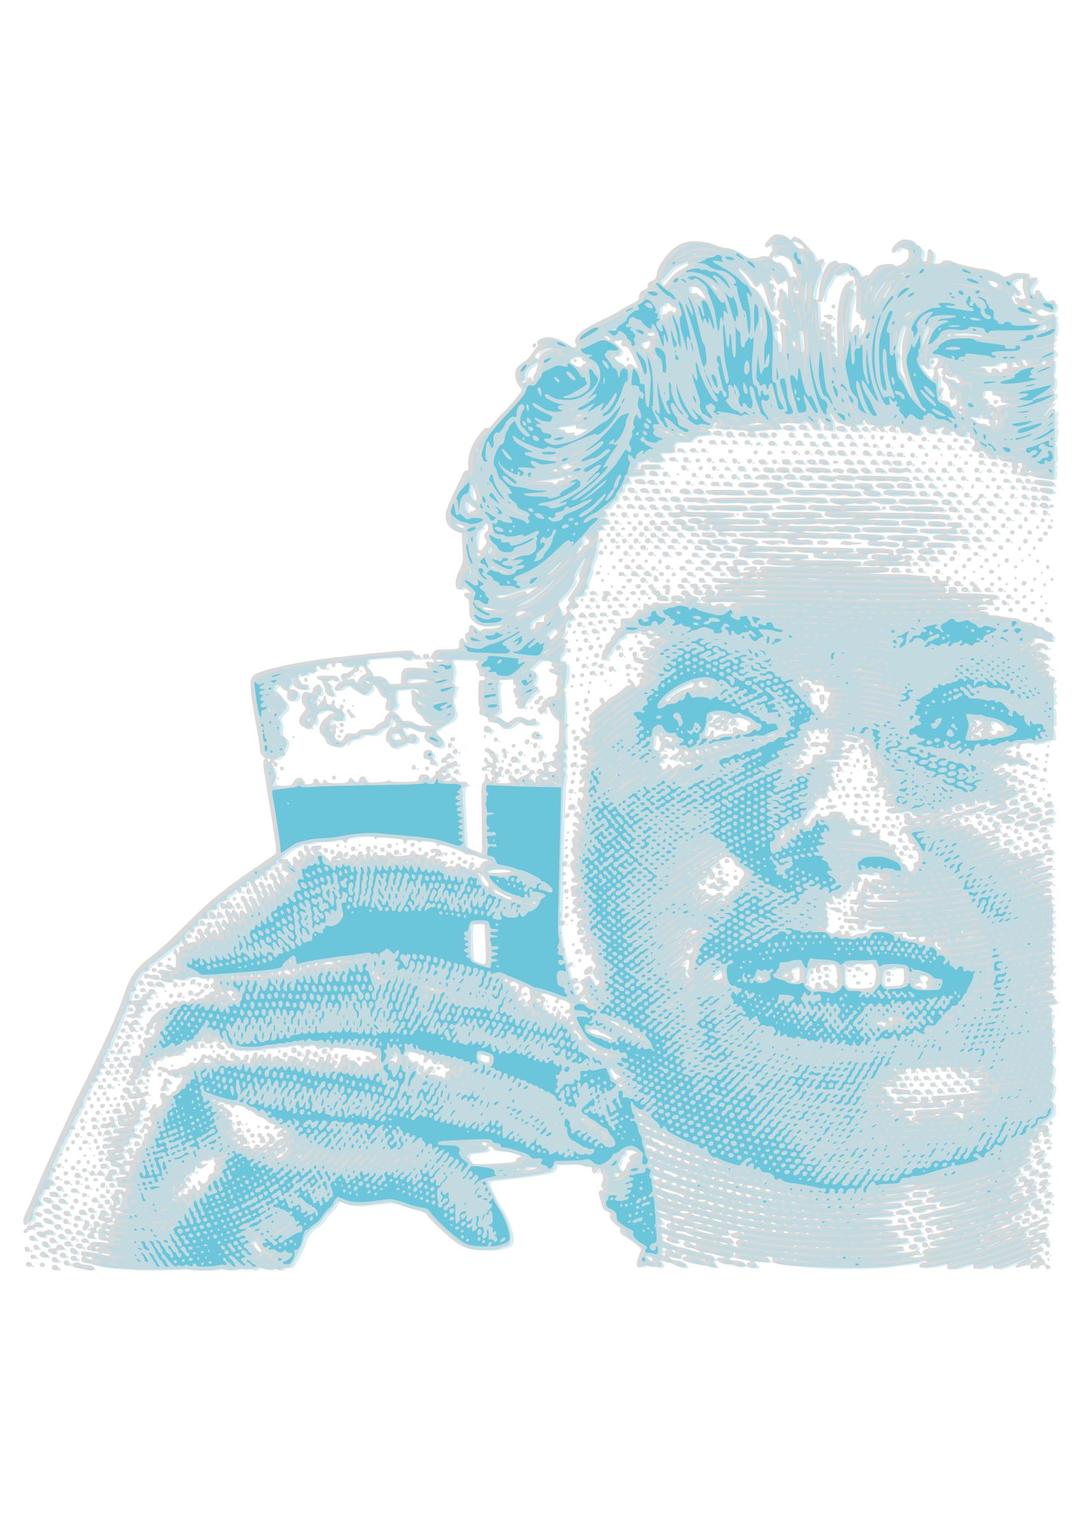 Happy woman drinking 06 png transparent